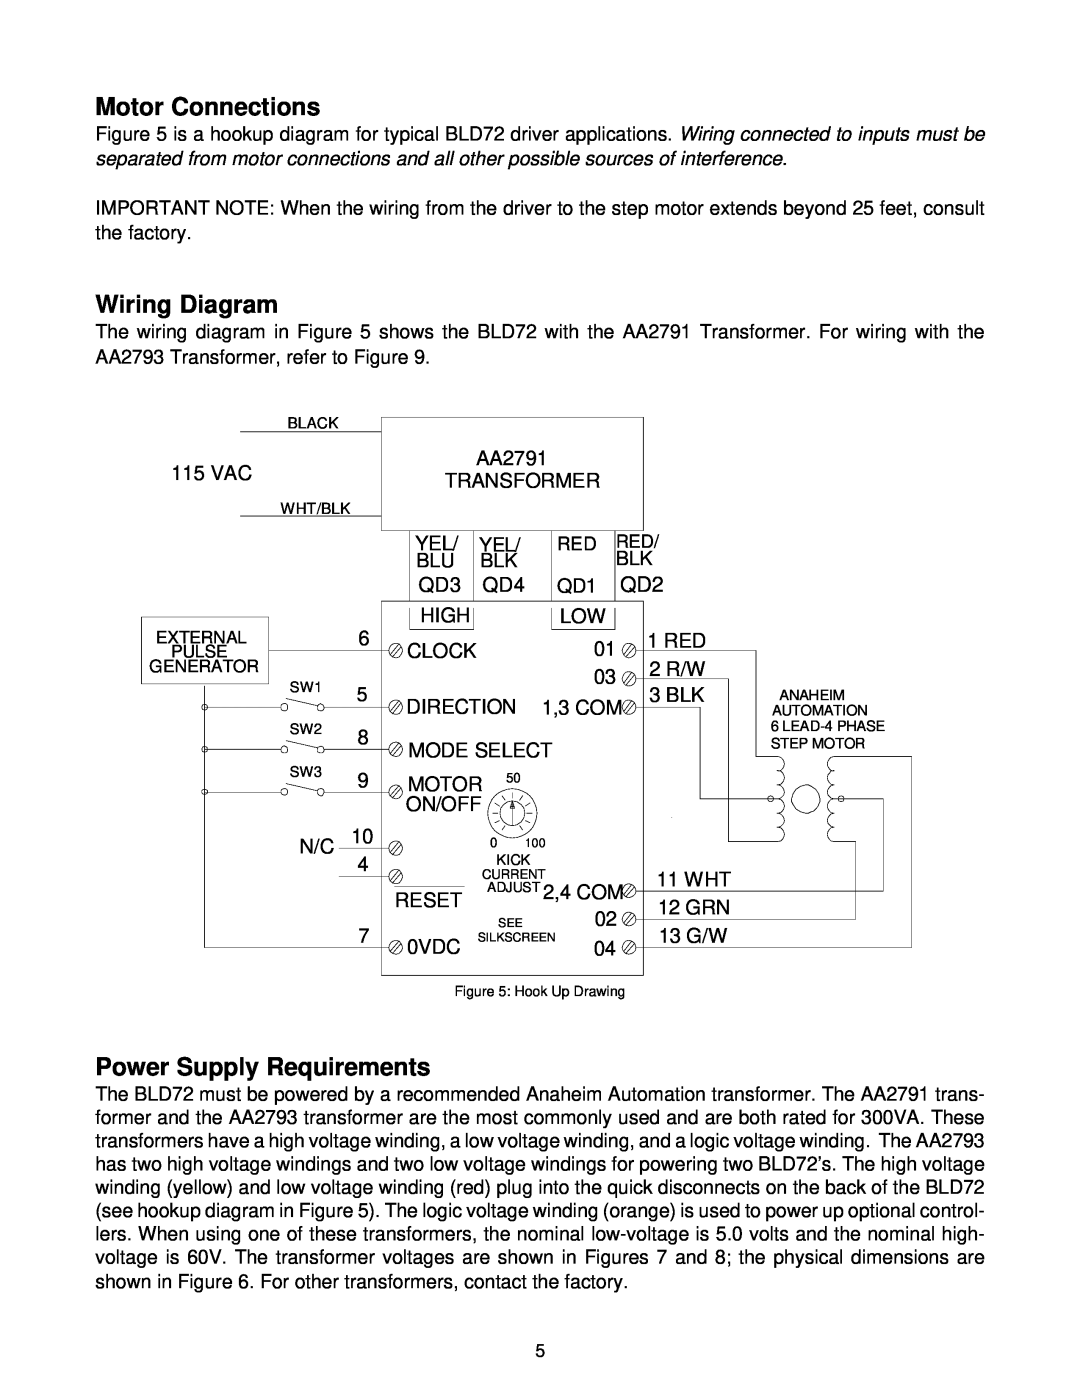 Anaheim BLD72-1 manual Motor Connections, Wiring Diagram, Power Supply Requirements 